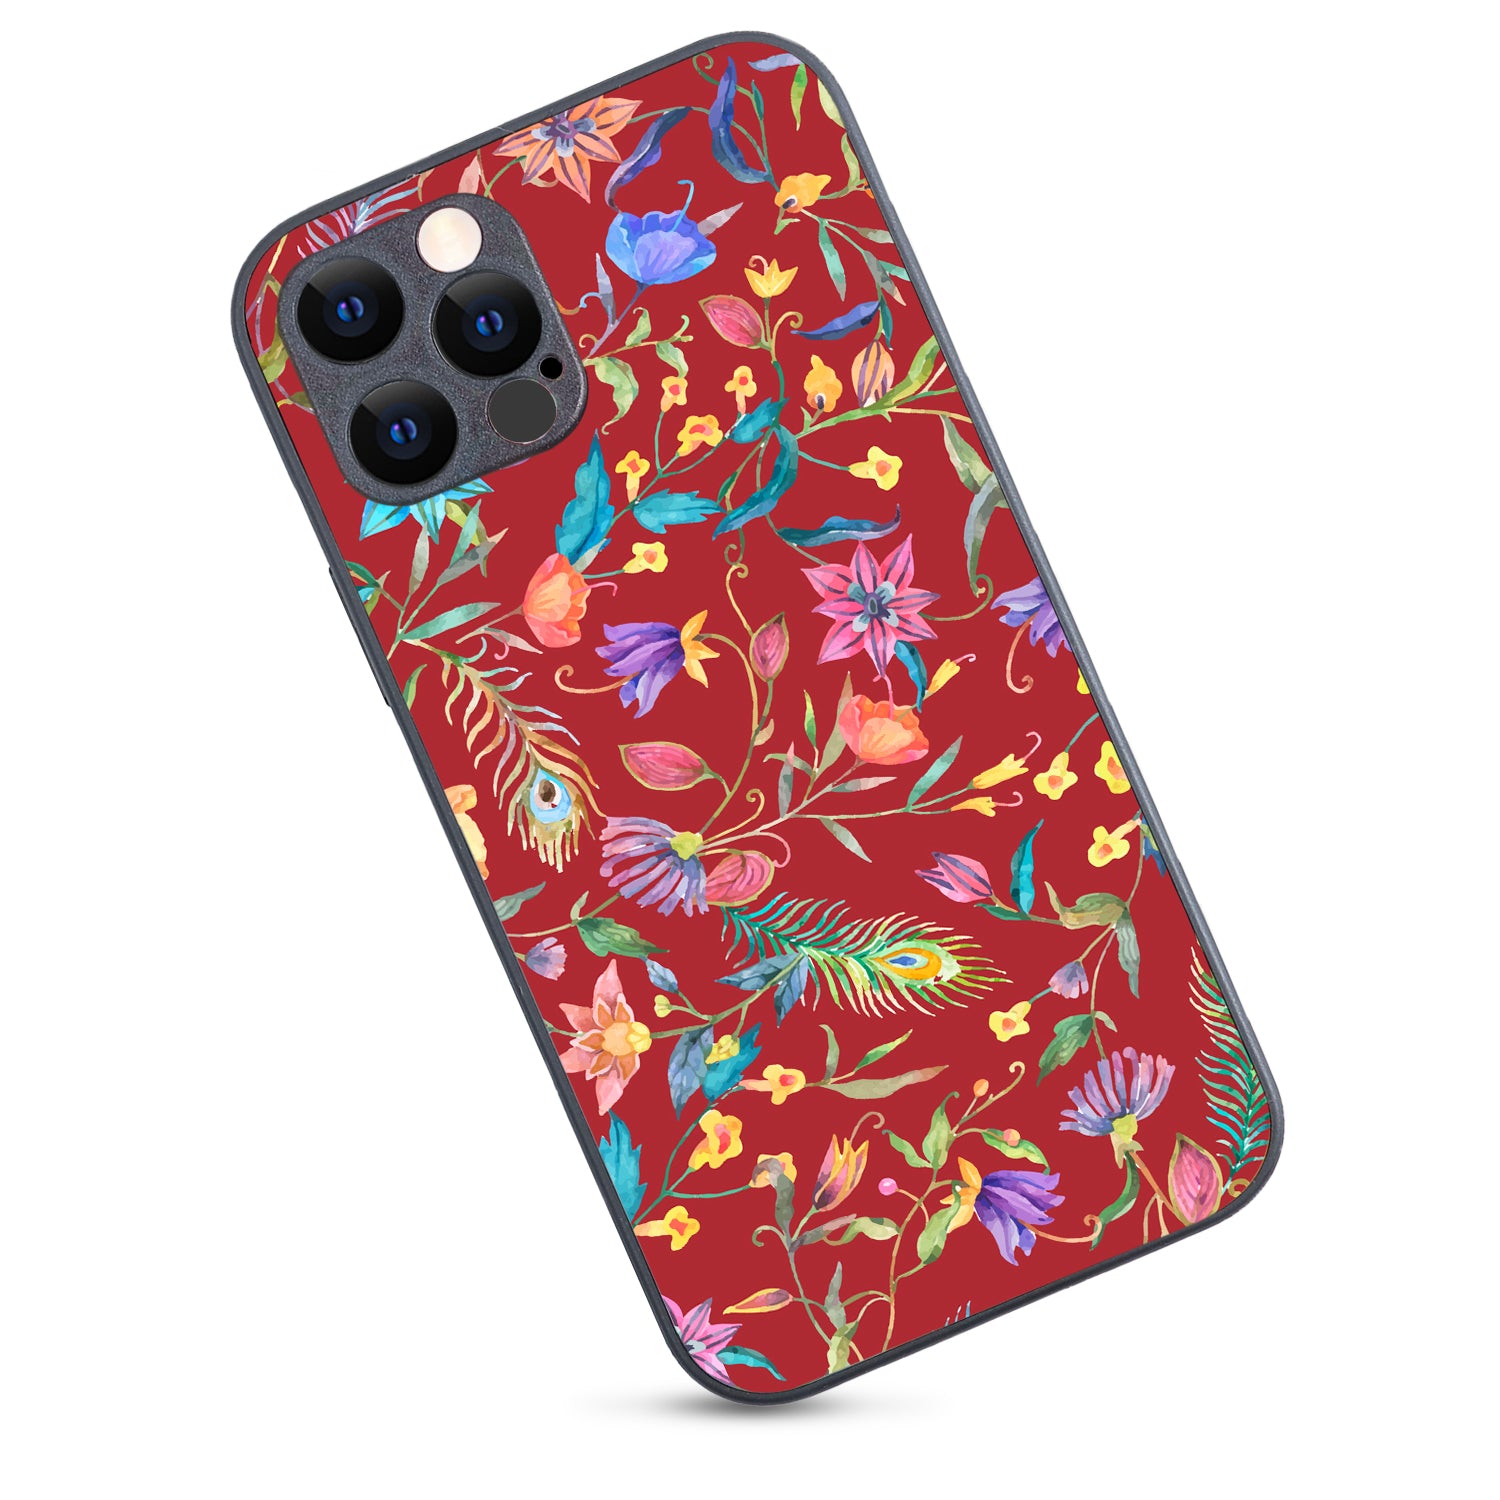 Red Doodle Floral iPhone 12 Pro Case